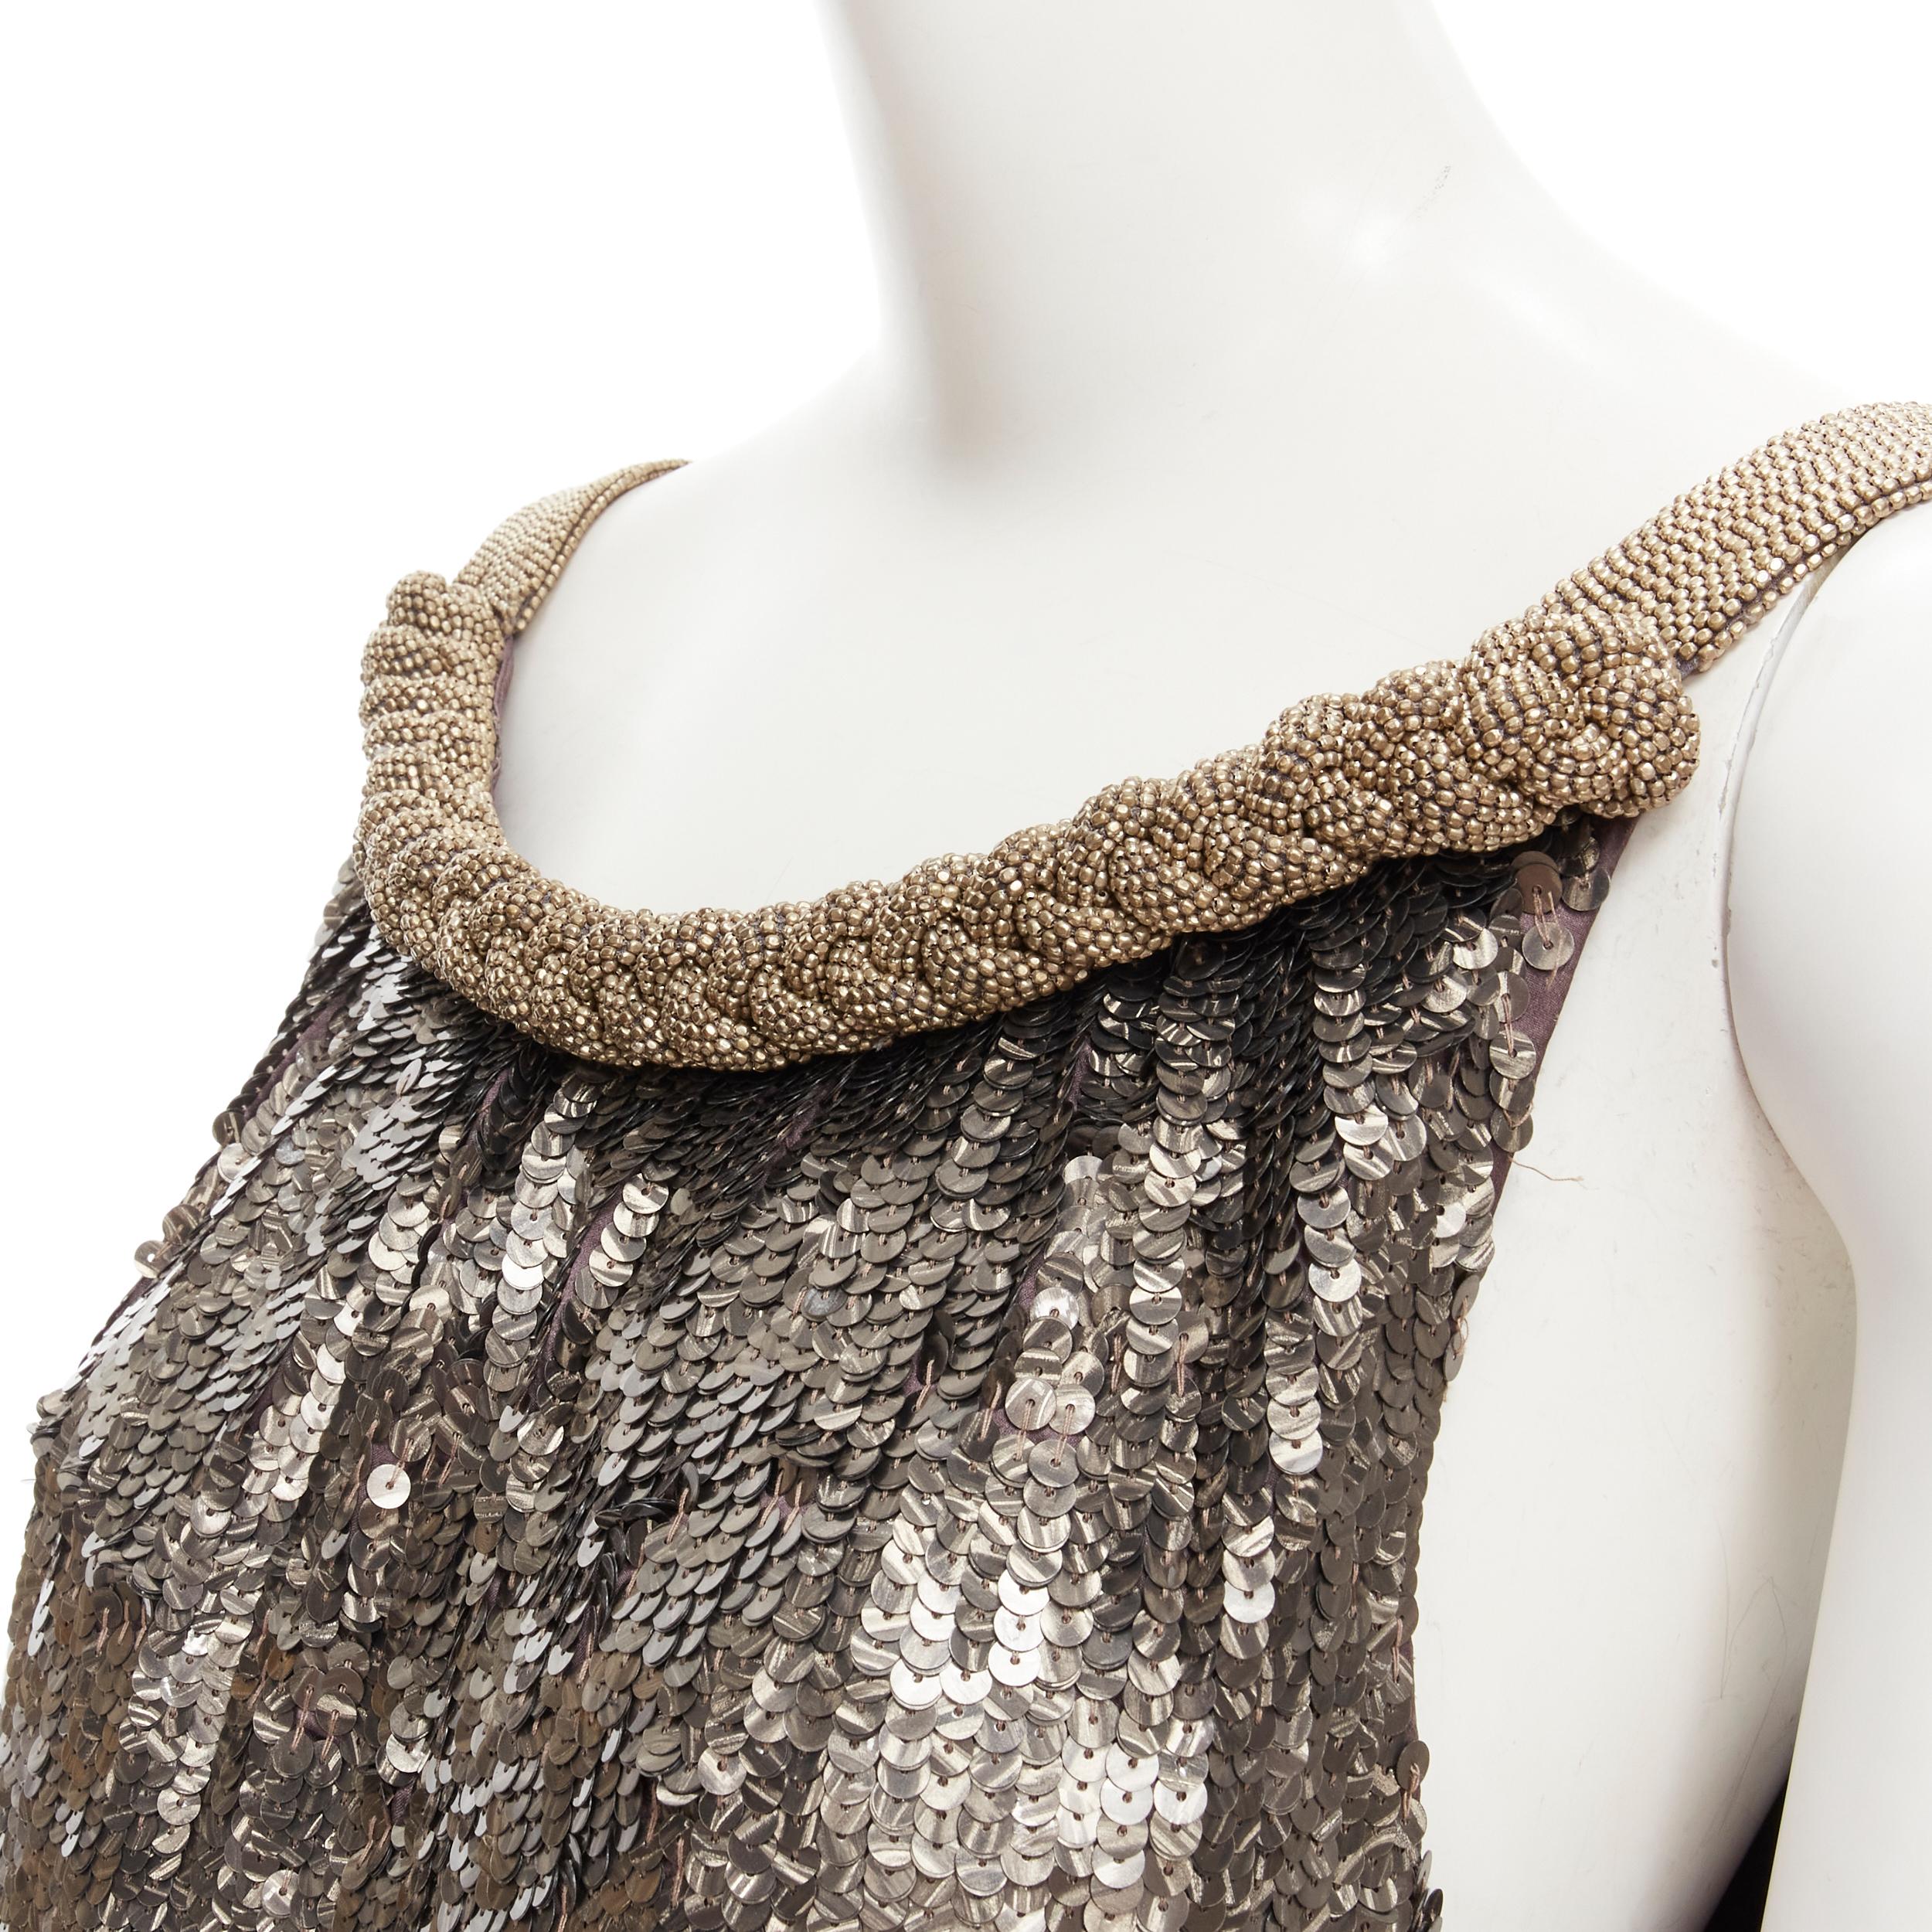 DRIES VAN NOTEN Vintage silver beaded braid neckline silver sequins dress FR40 M
Reference: GIYG/A00148
Brand: Dries Van Noten
Designer: Dries Van Noten
Material: Silk
Color: Silver
Pattern: Solid
Extra Detail: Silver beaded braid trim neckline.